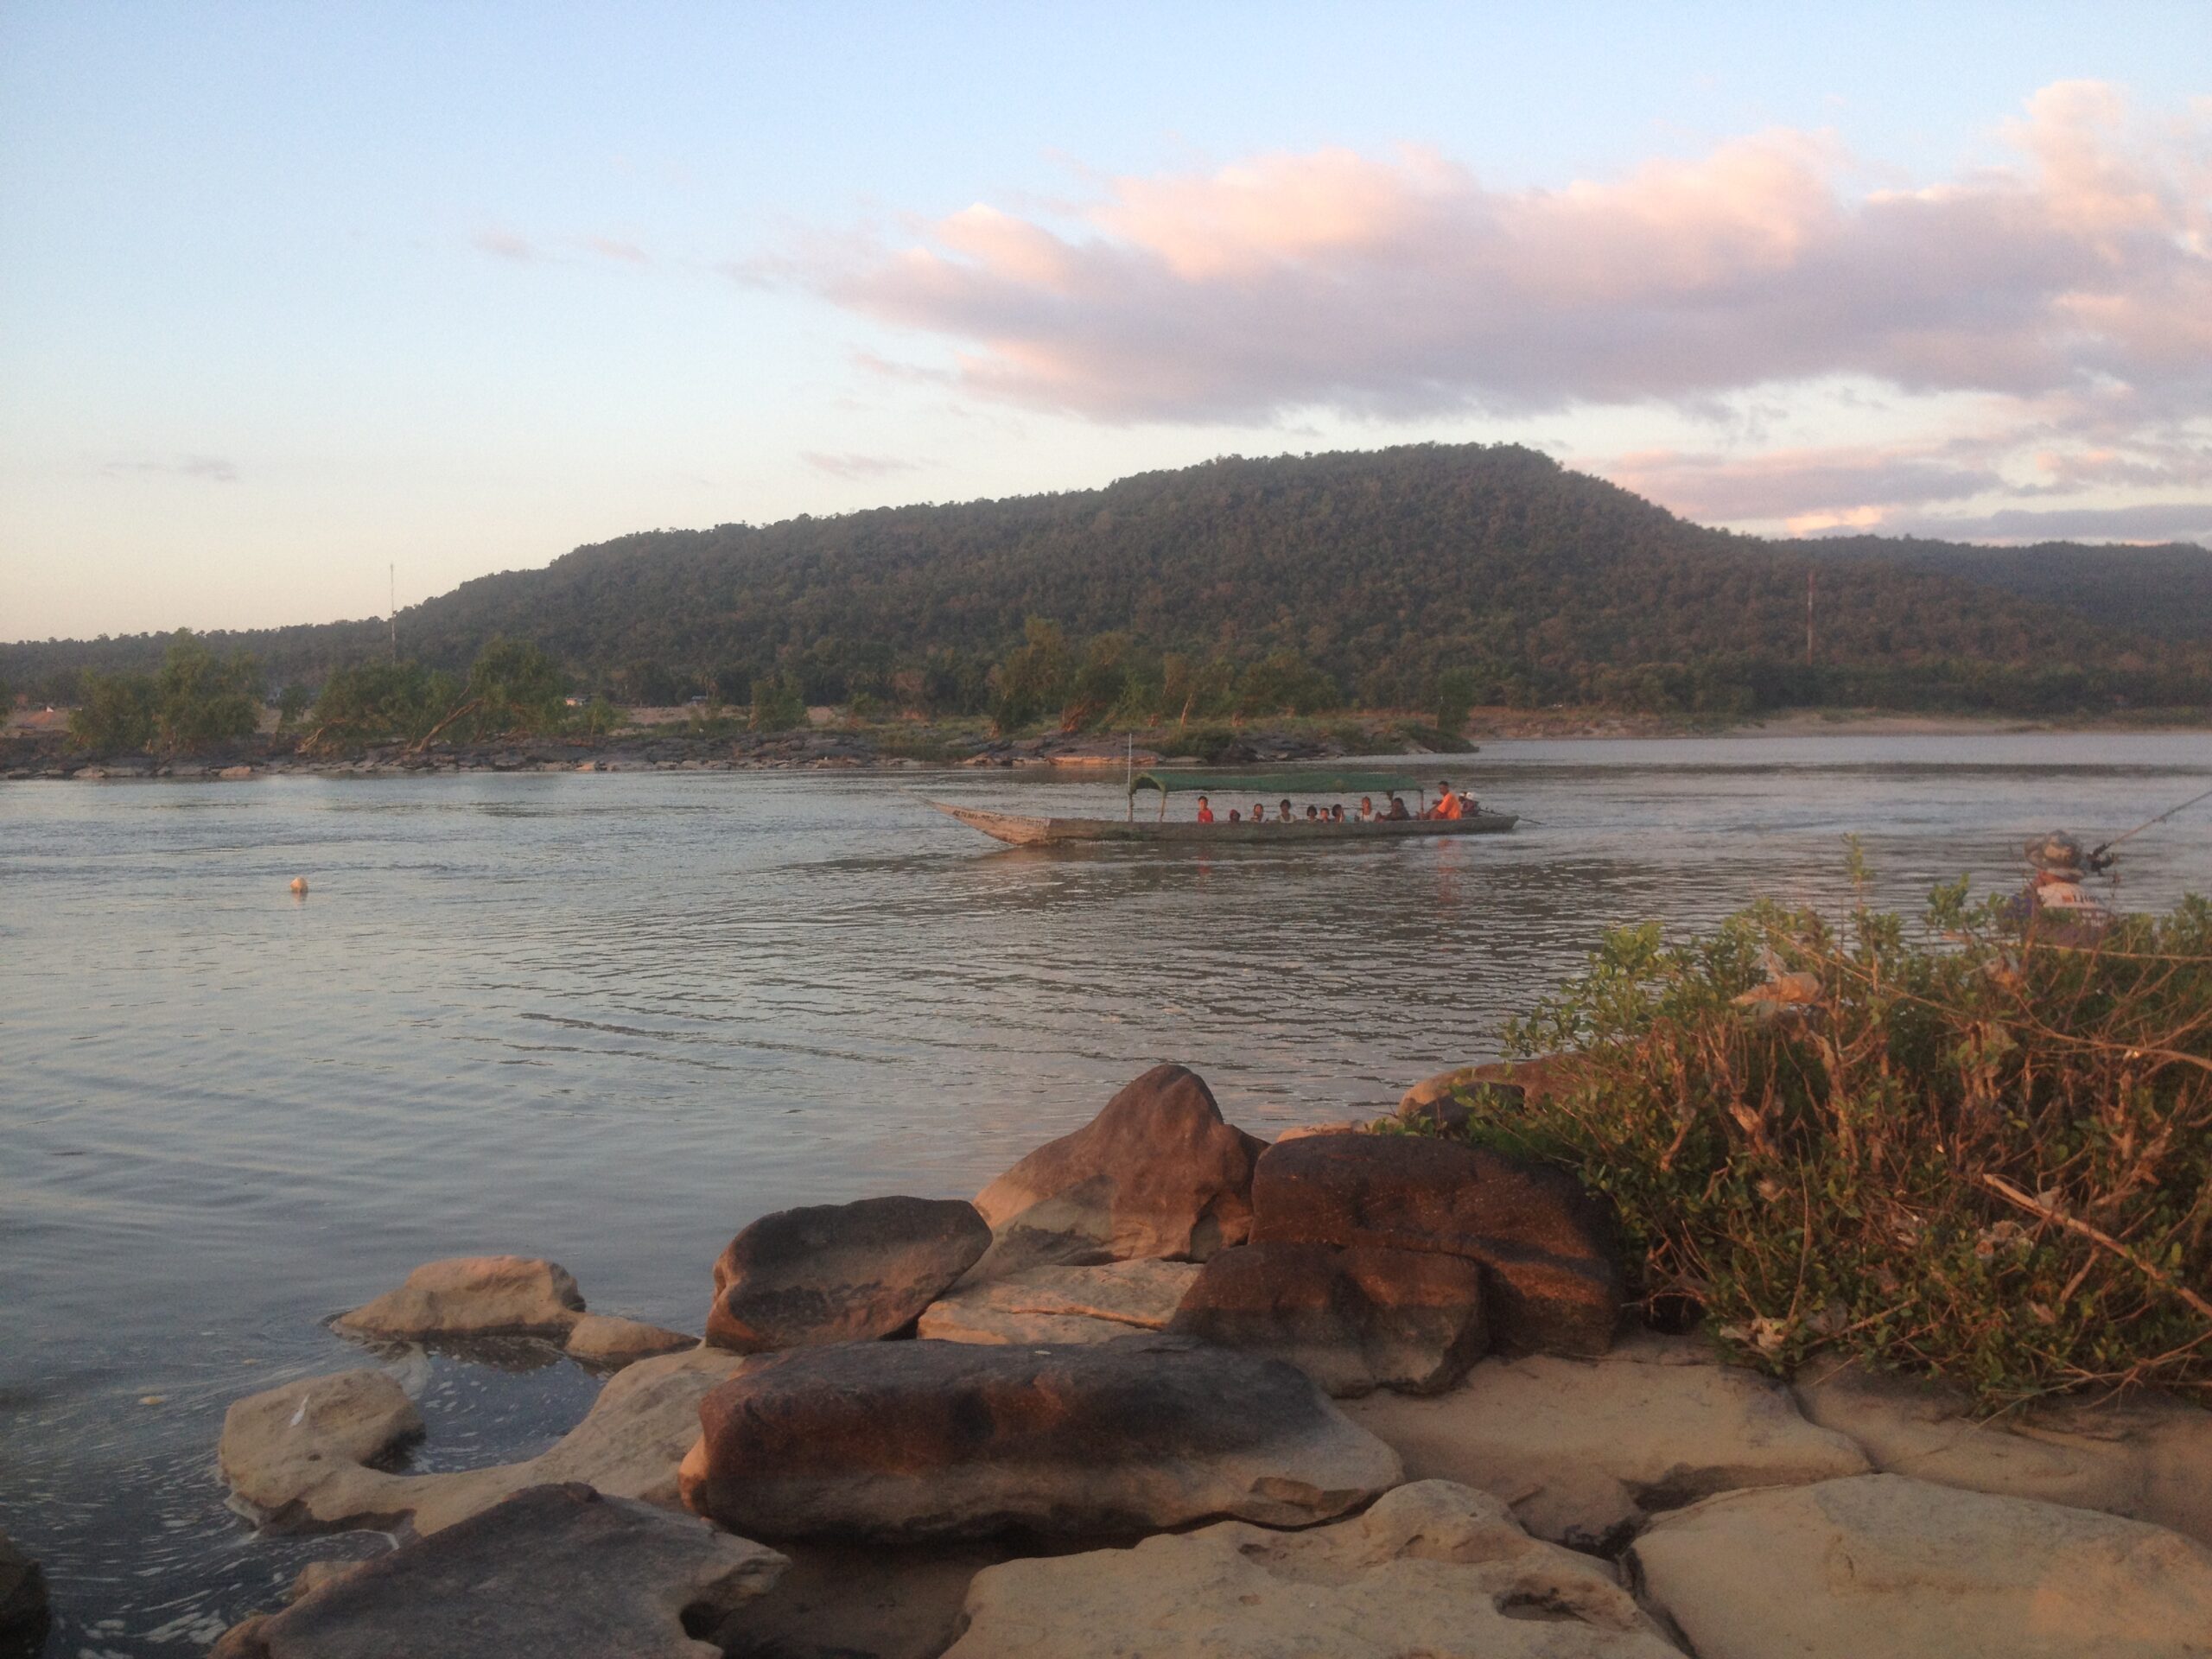  sun set at the confluence of the chocolate-brown Mekong and the deep blue Mun rivers